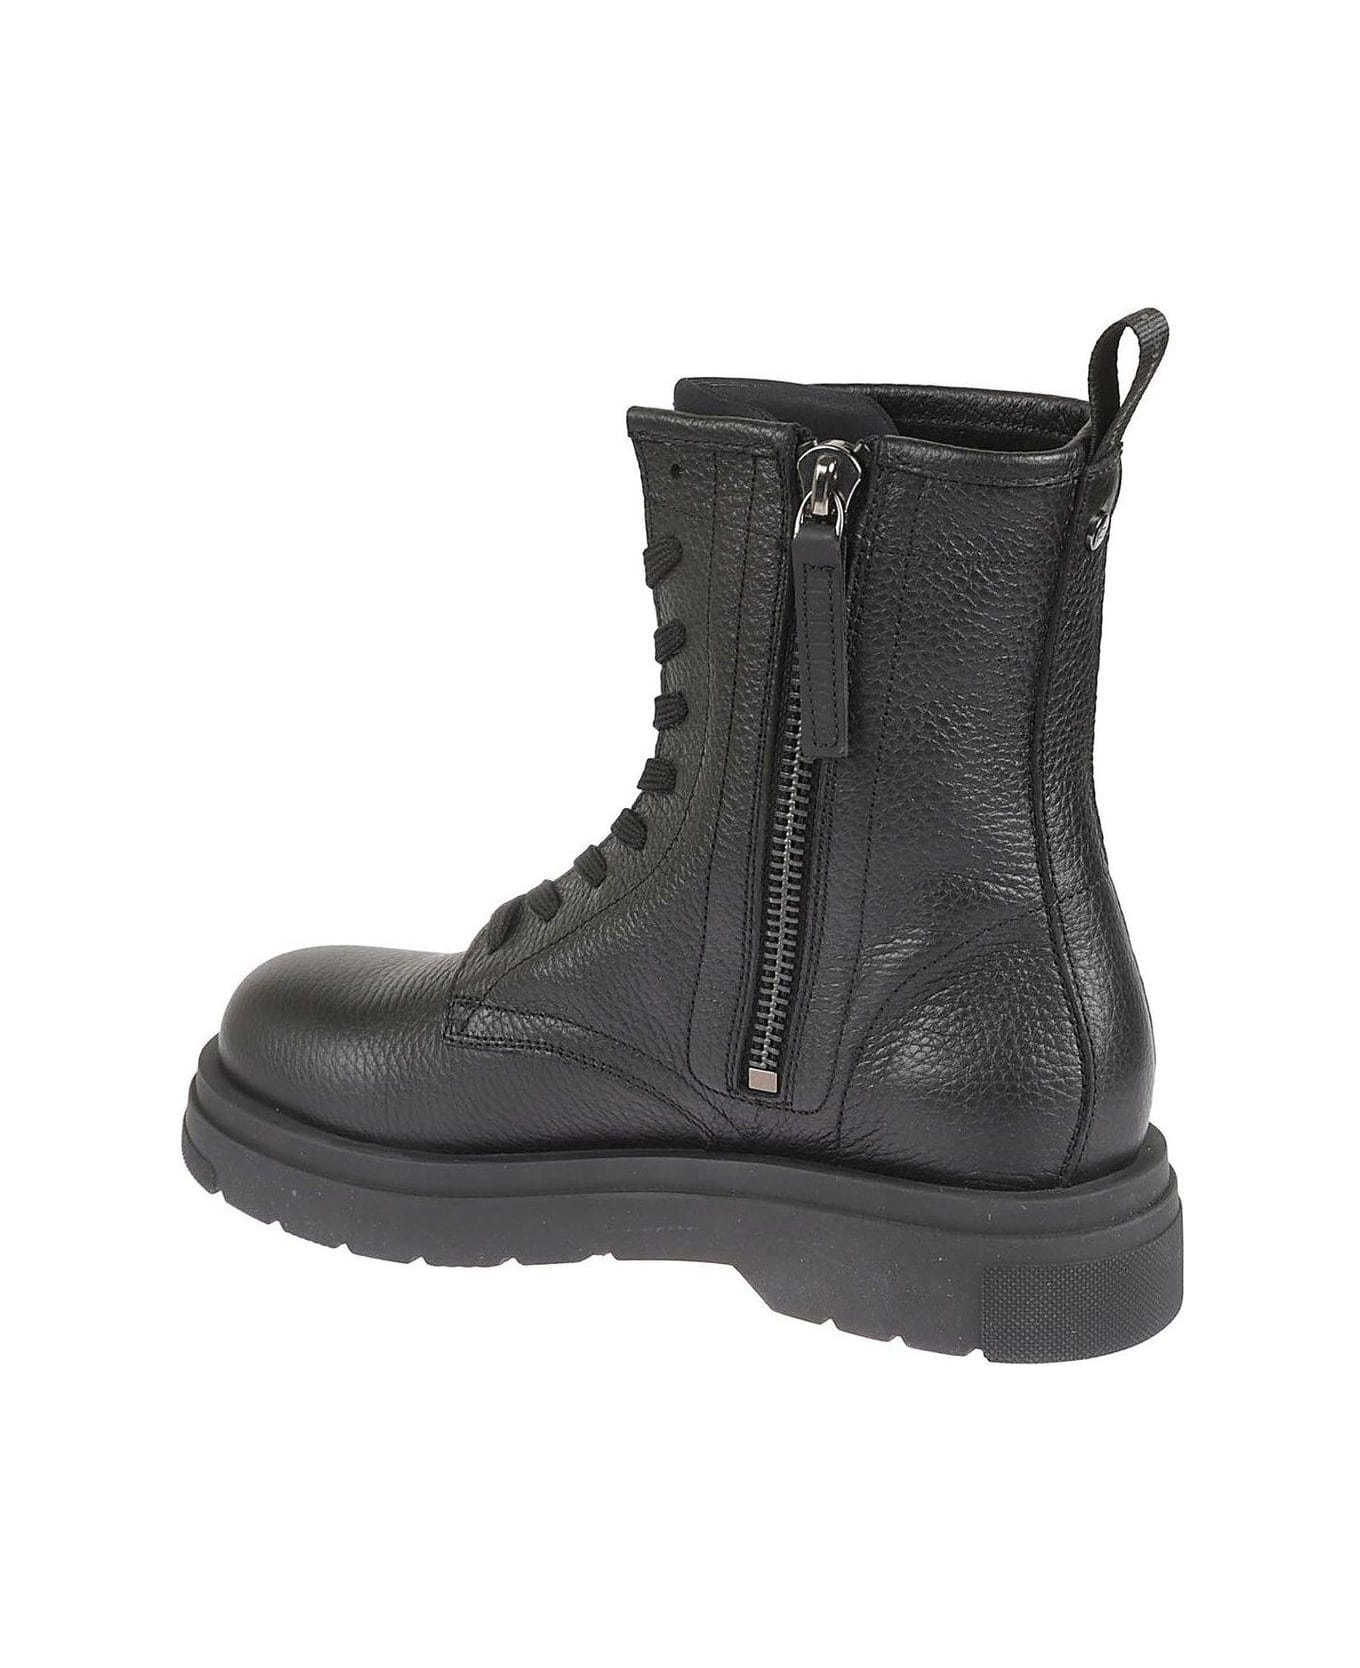 Woolrich New City Zipped Ankle Boots - Black